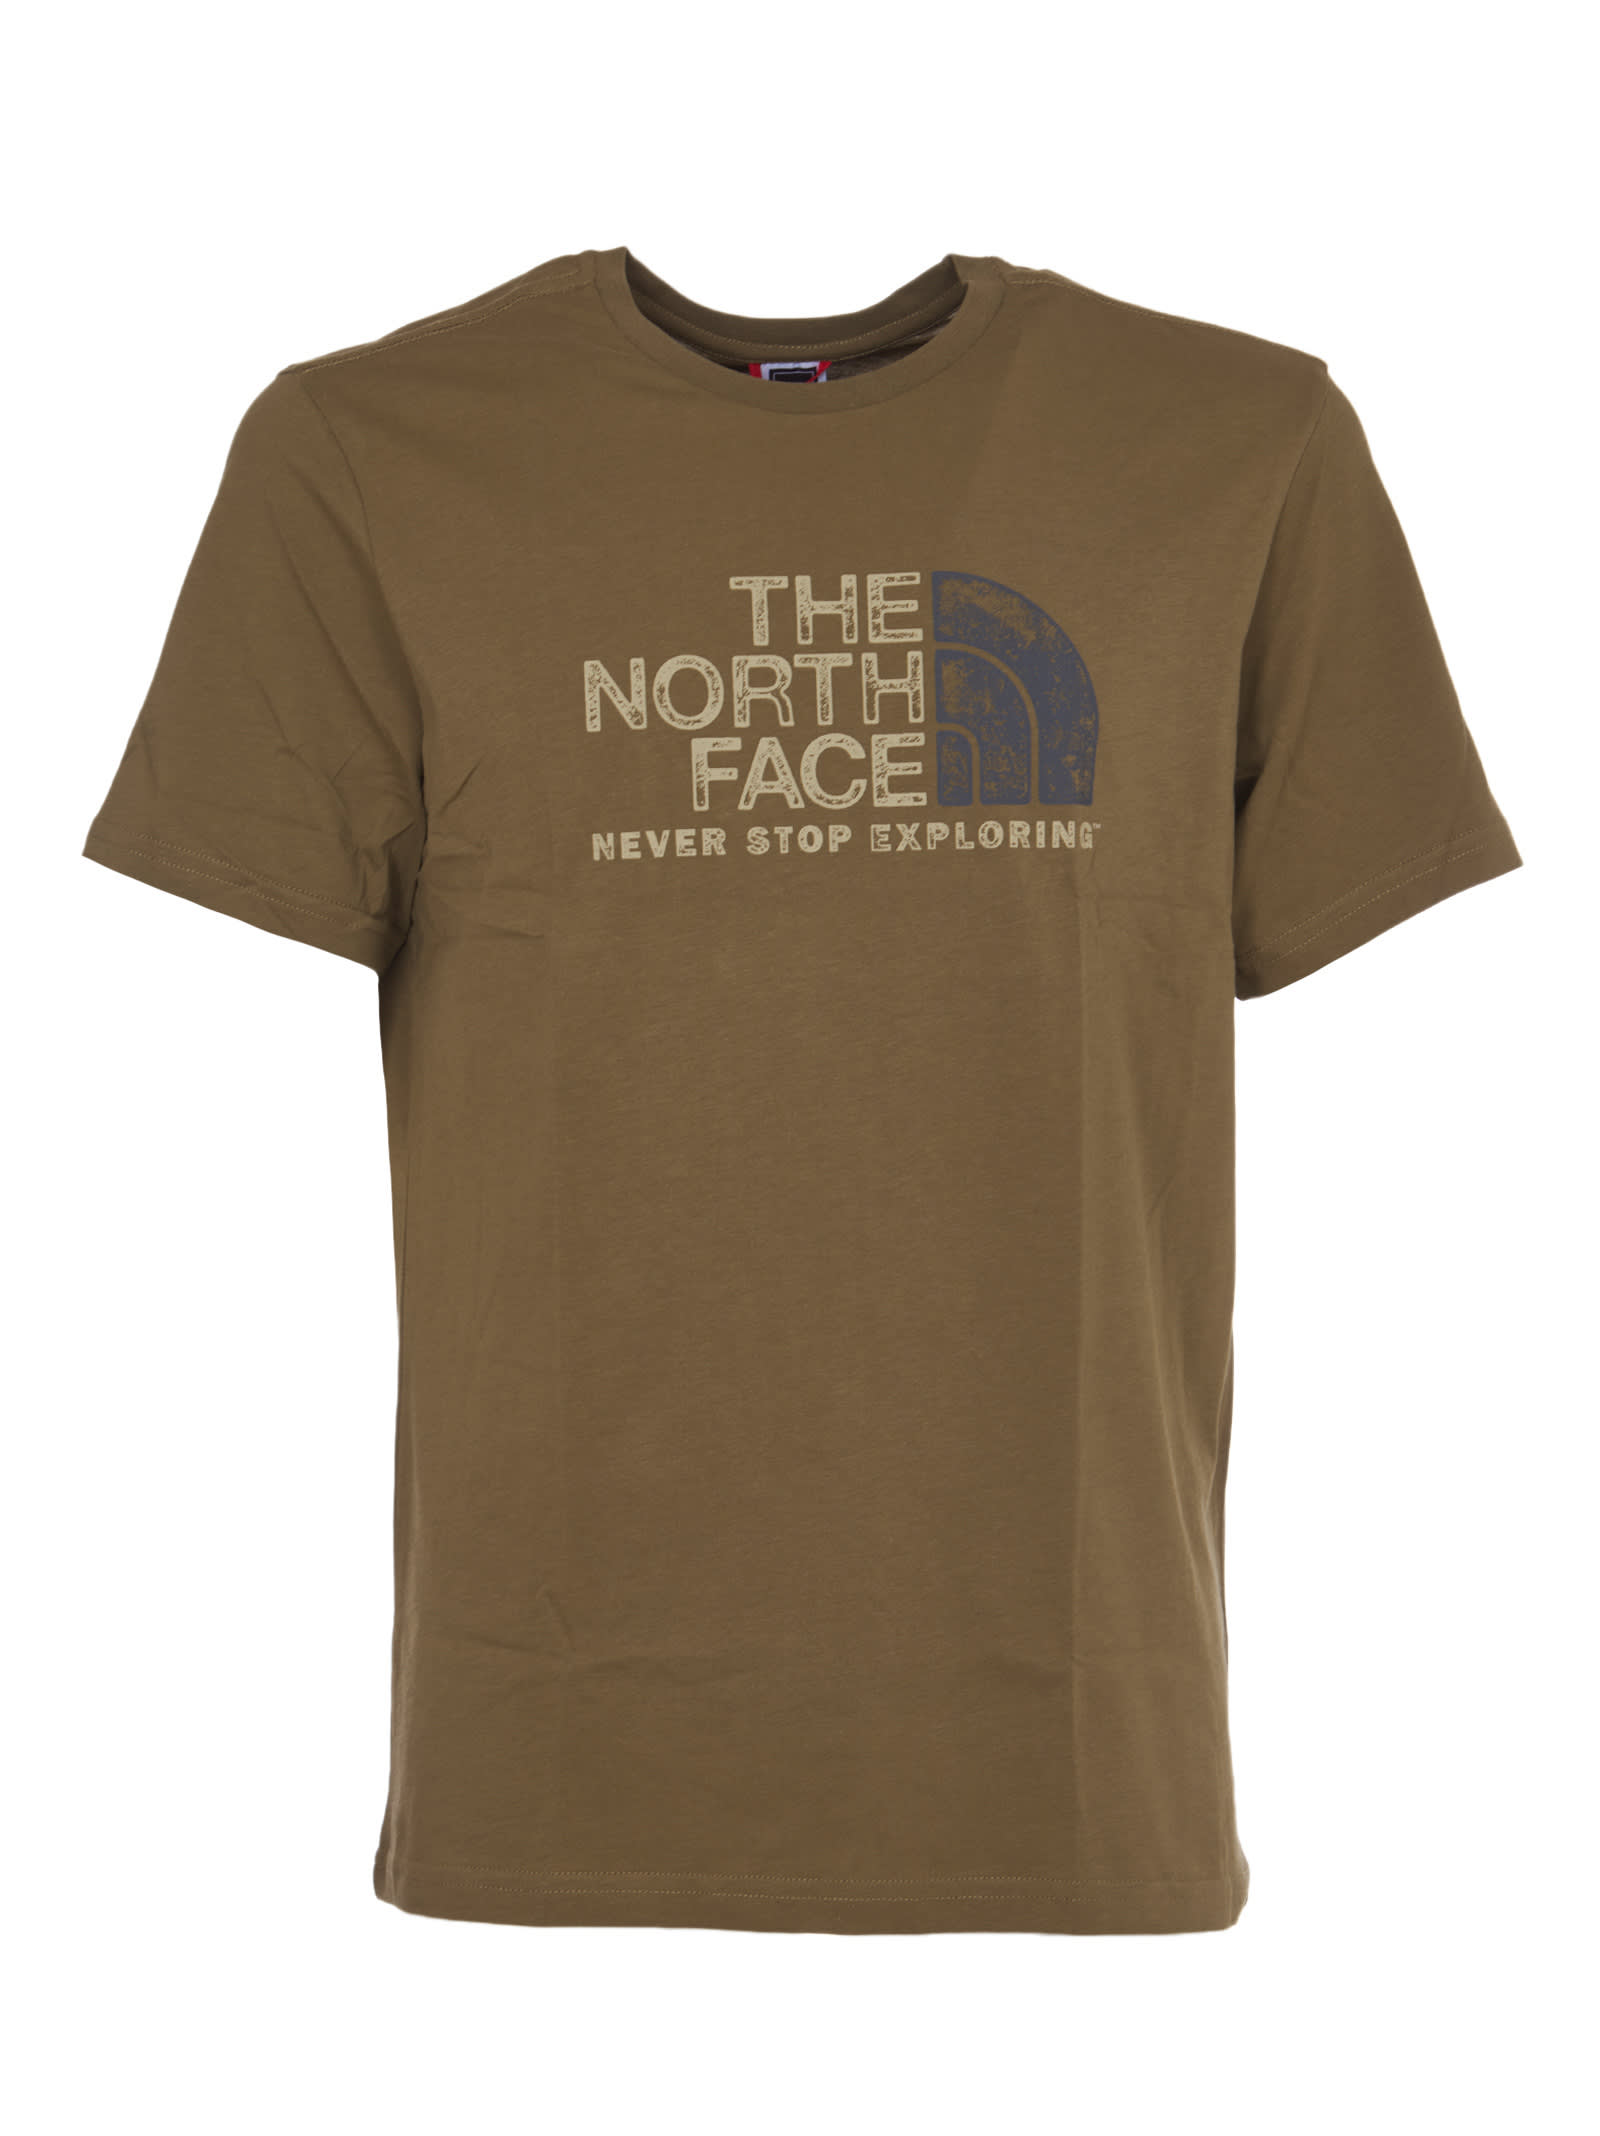 The North Face Green T-shirt never Stop Exploring